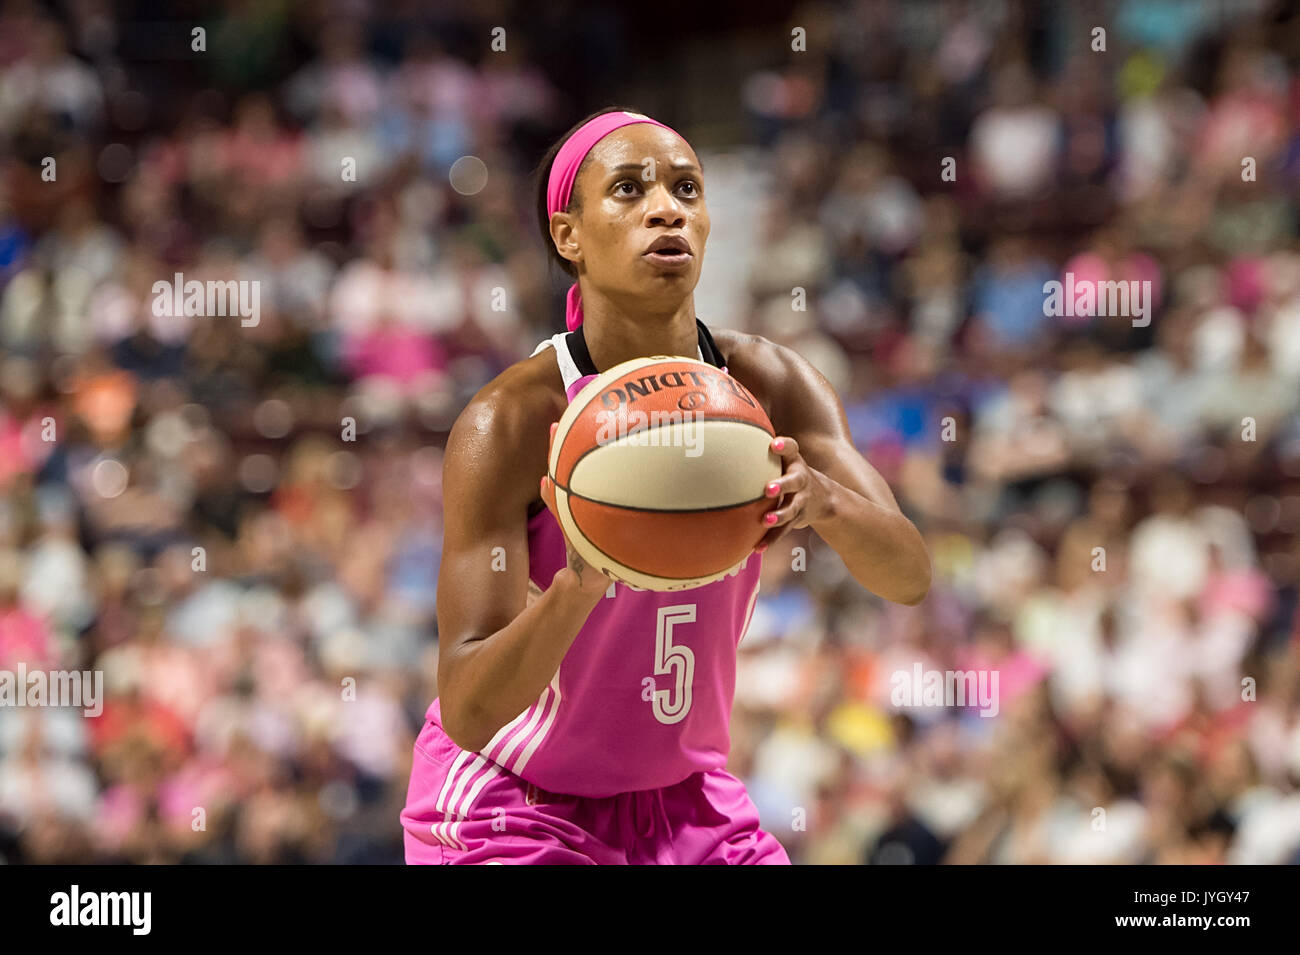 Uncasville, Connecticut, USA. 18 August, 2017. Connecticut Sun guard Jasmine Thomas (5) at the free throw line during the WNBA basketball game between the New York Liberty and the Connecticut Sun at Mohegan Sun Arena. New York defeated Connecticut 82-70. Chris Poss/Alamy Live News Stock Photo